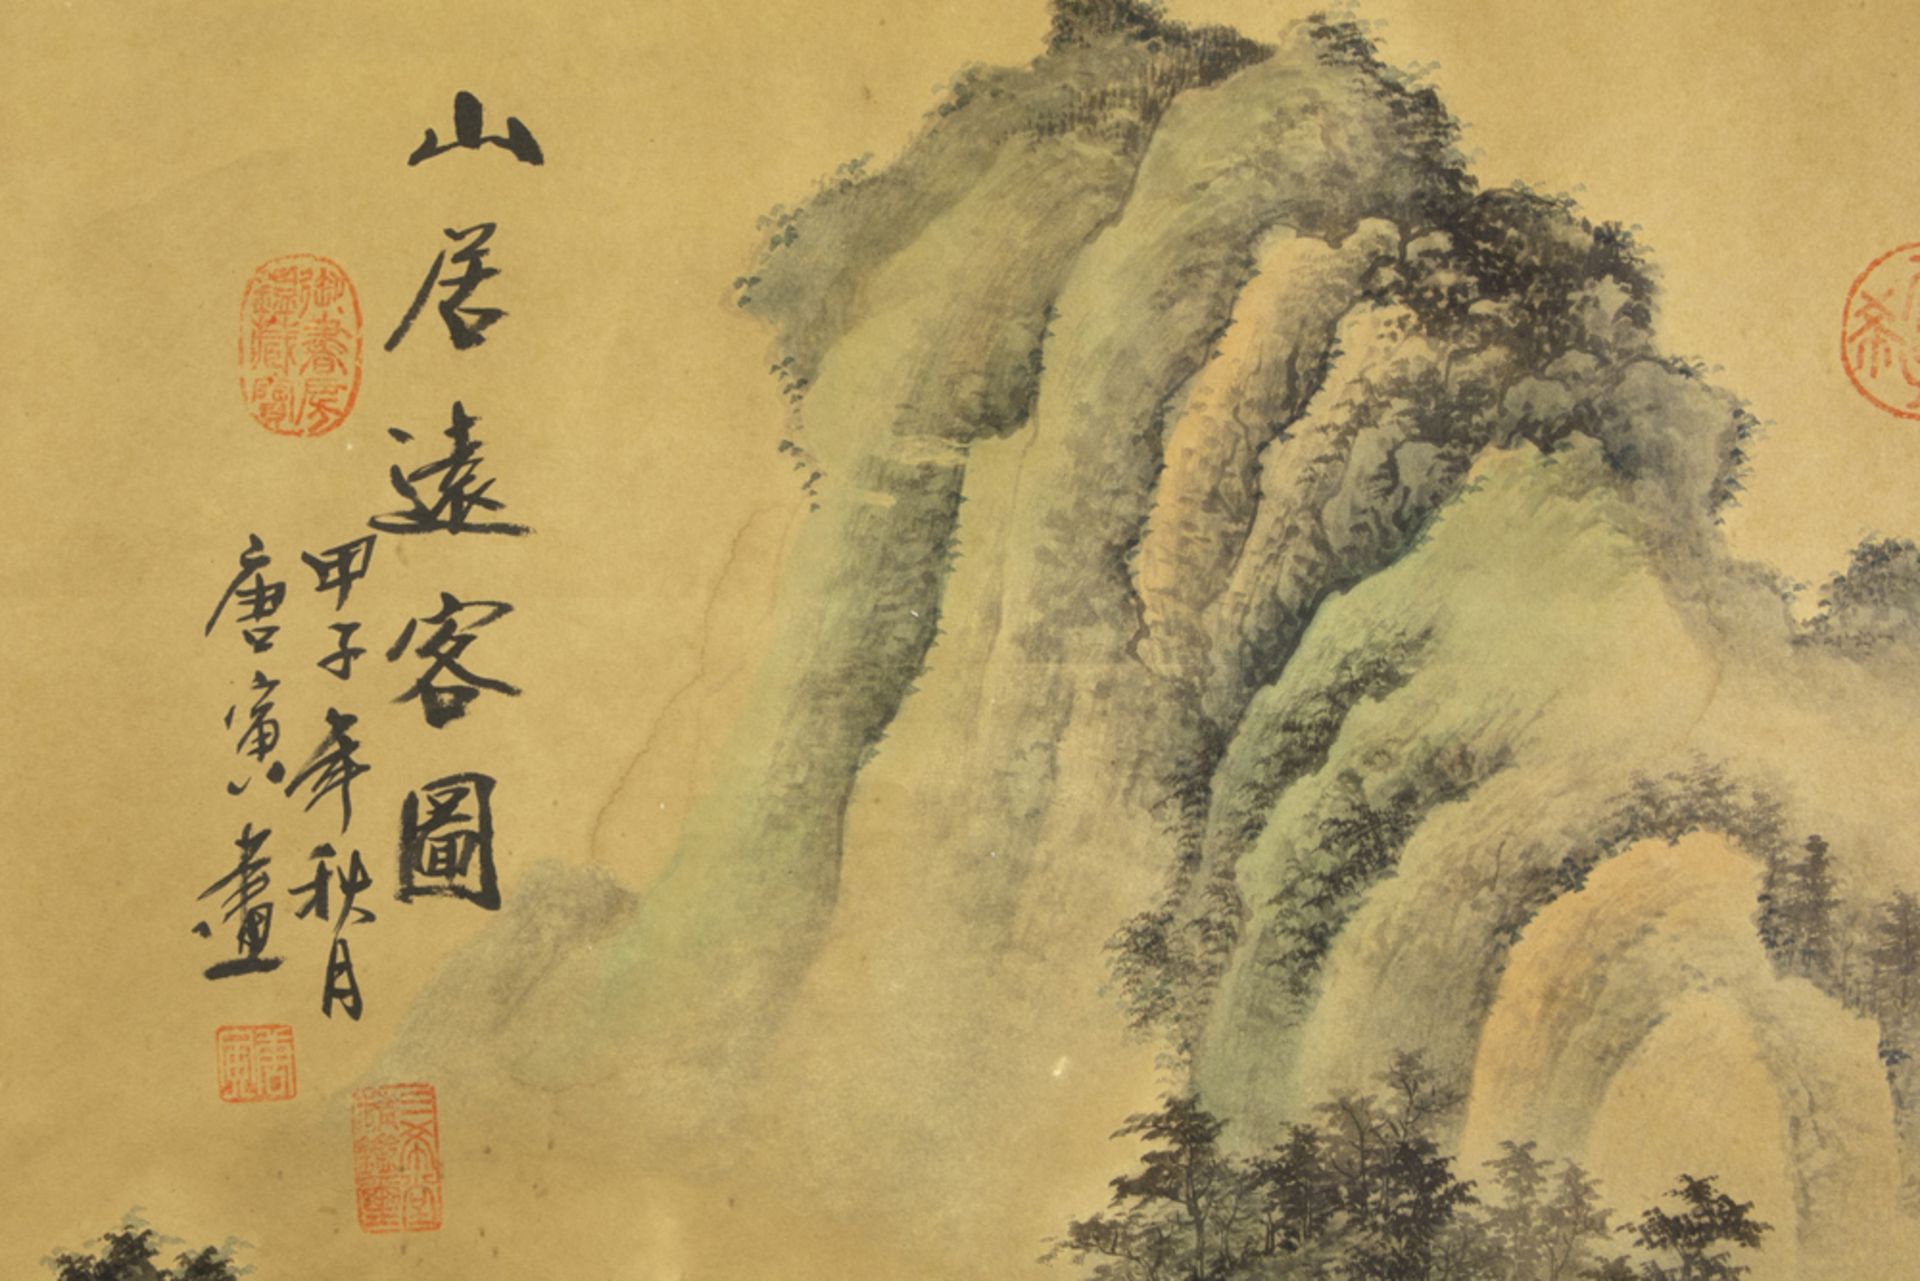 antique Chinese scroll with a landscape painting || Antieke Chinese scroll met landschapsschildering - Image 4 of 5